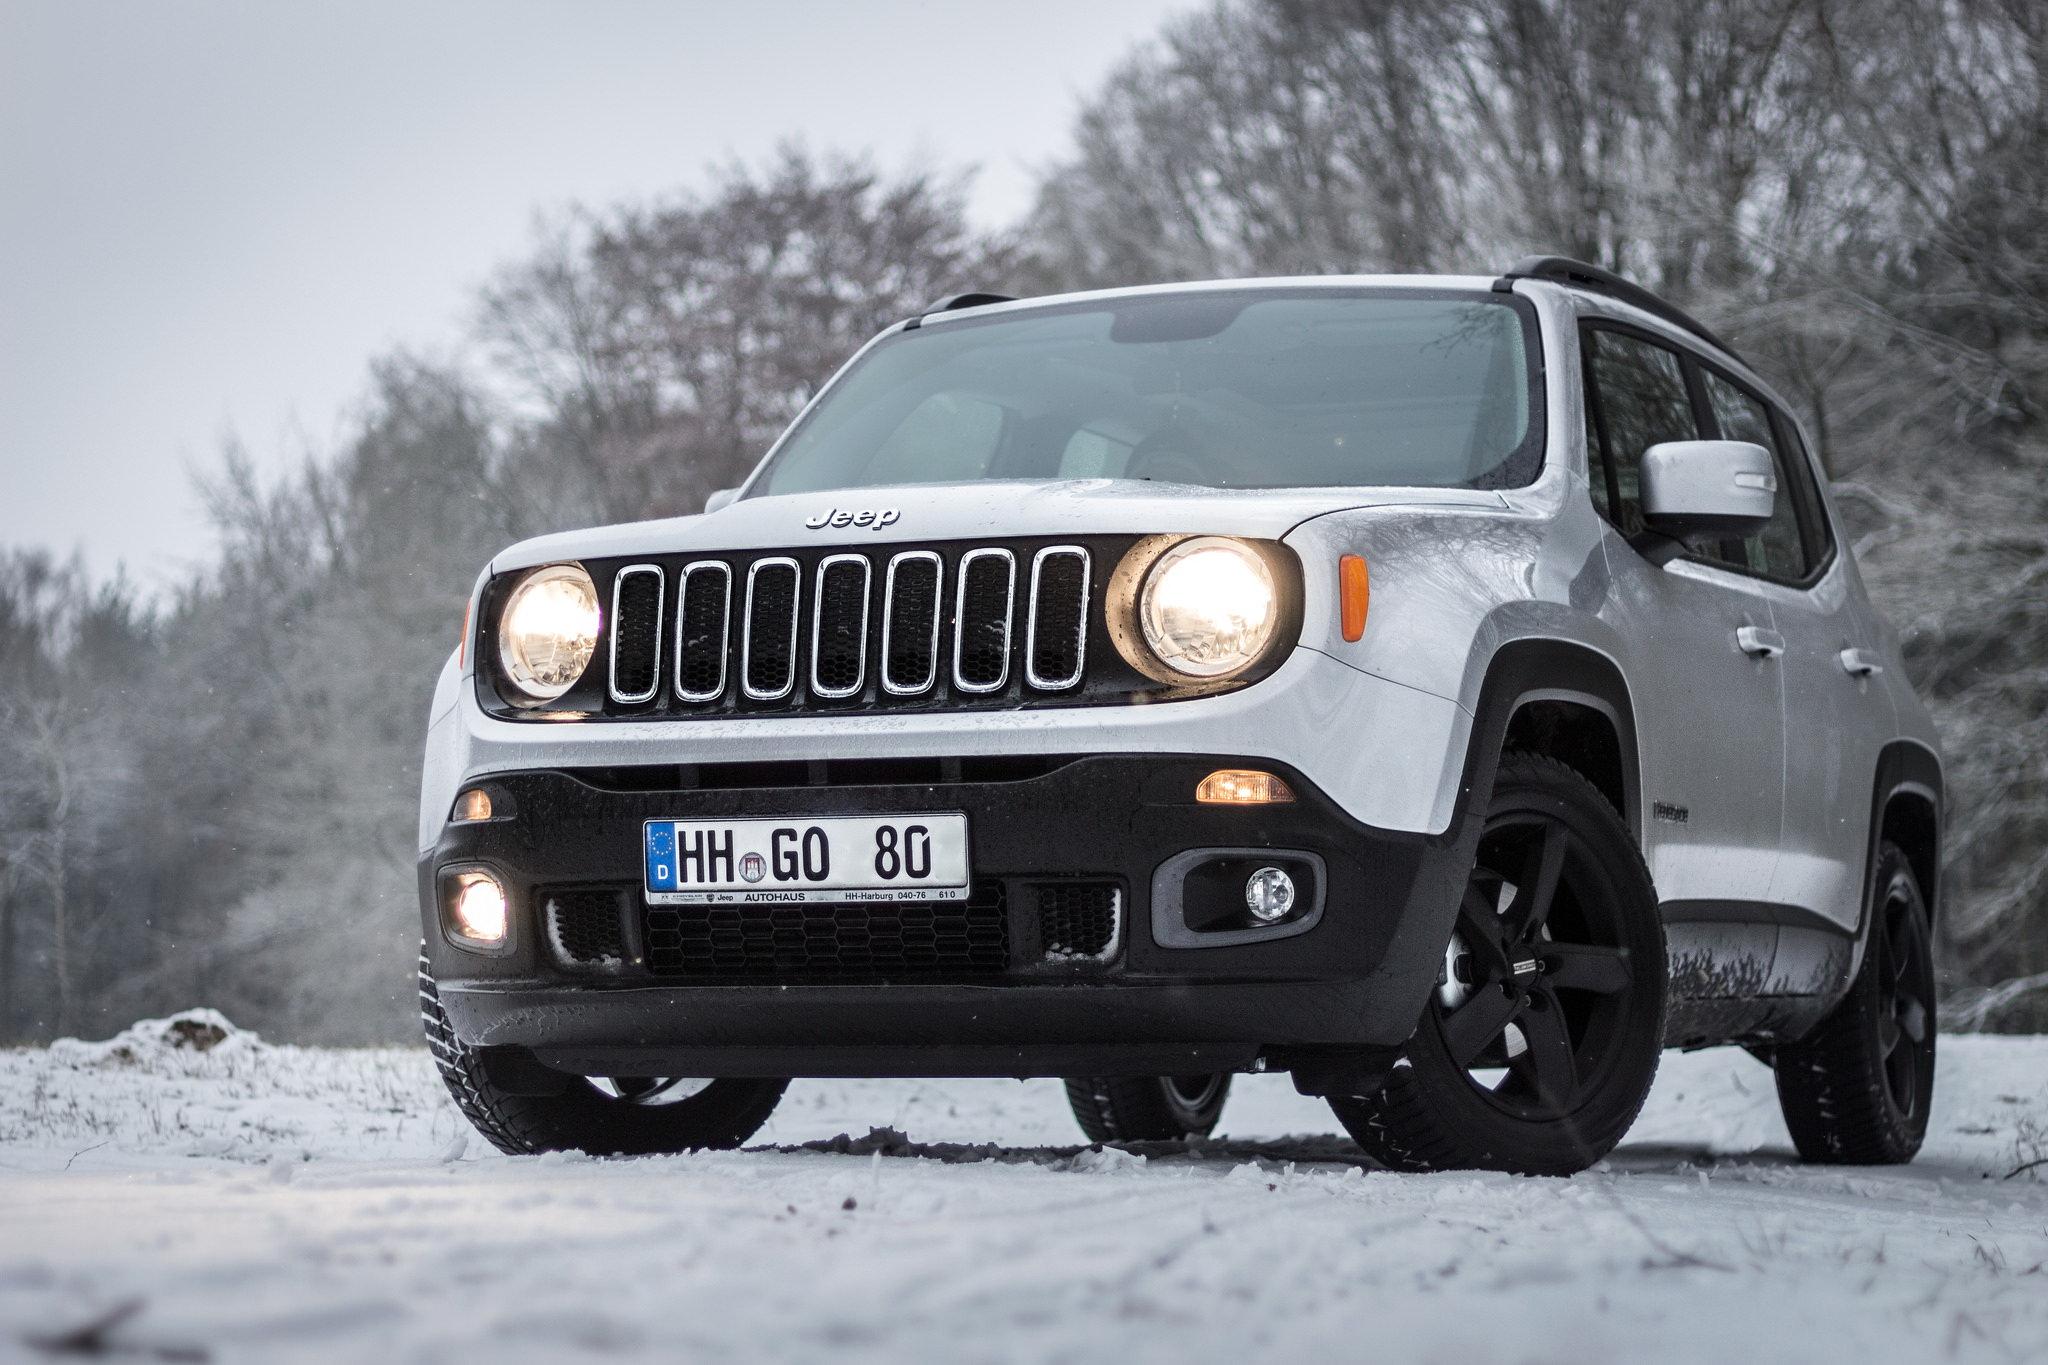 Cool Jeep Renegade Wallpapers 2K Car Pictures Website